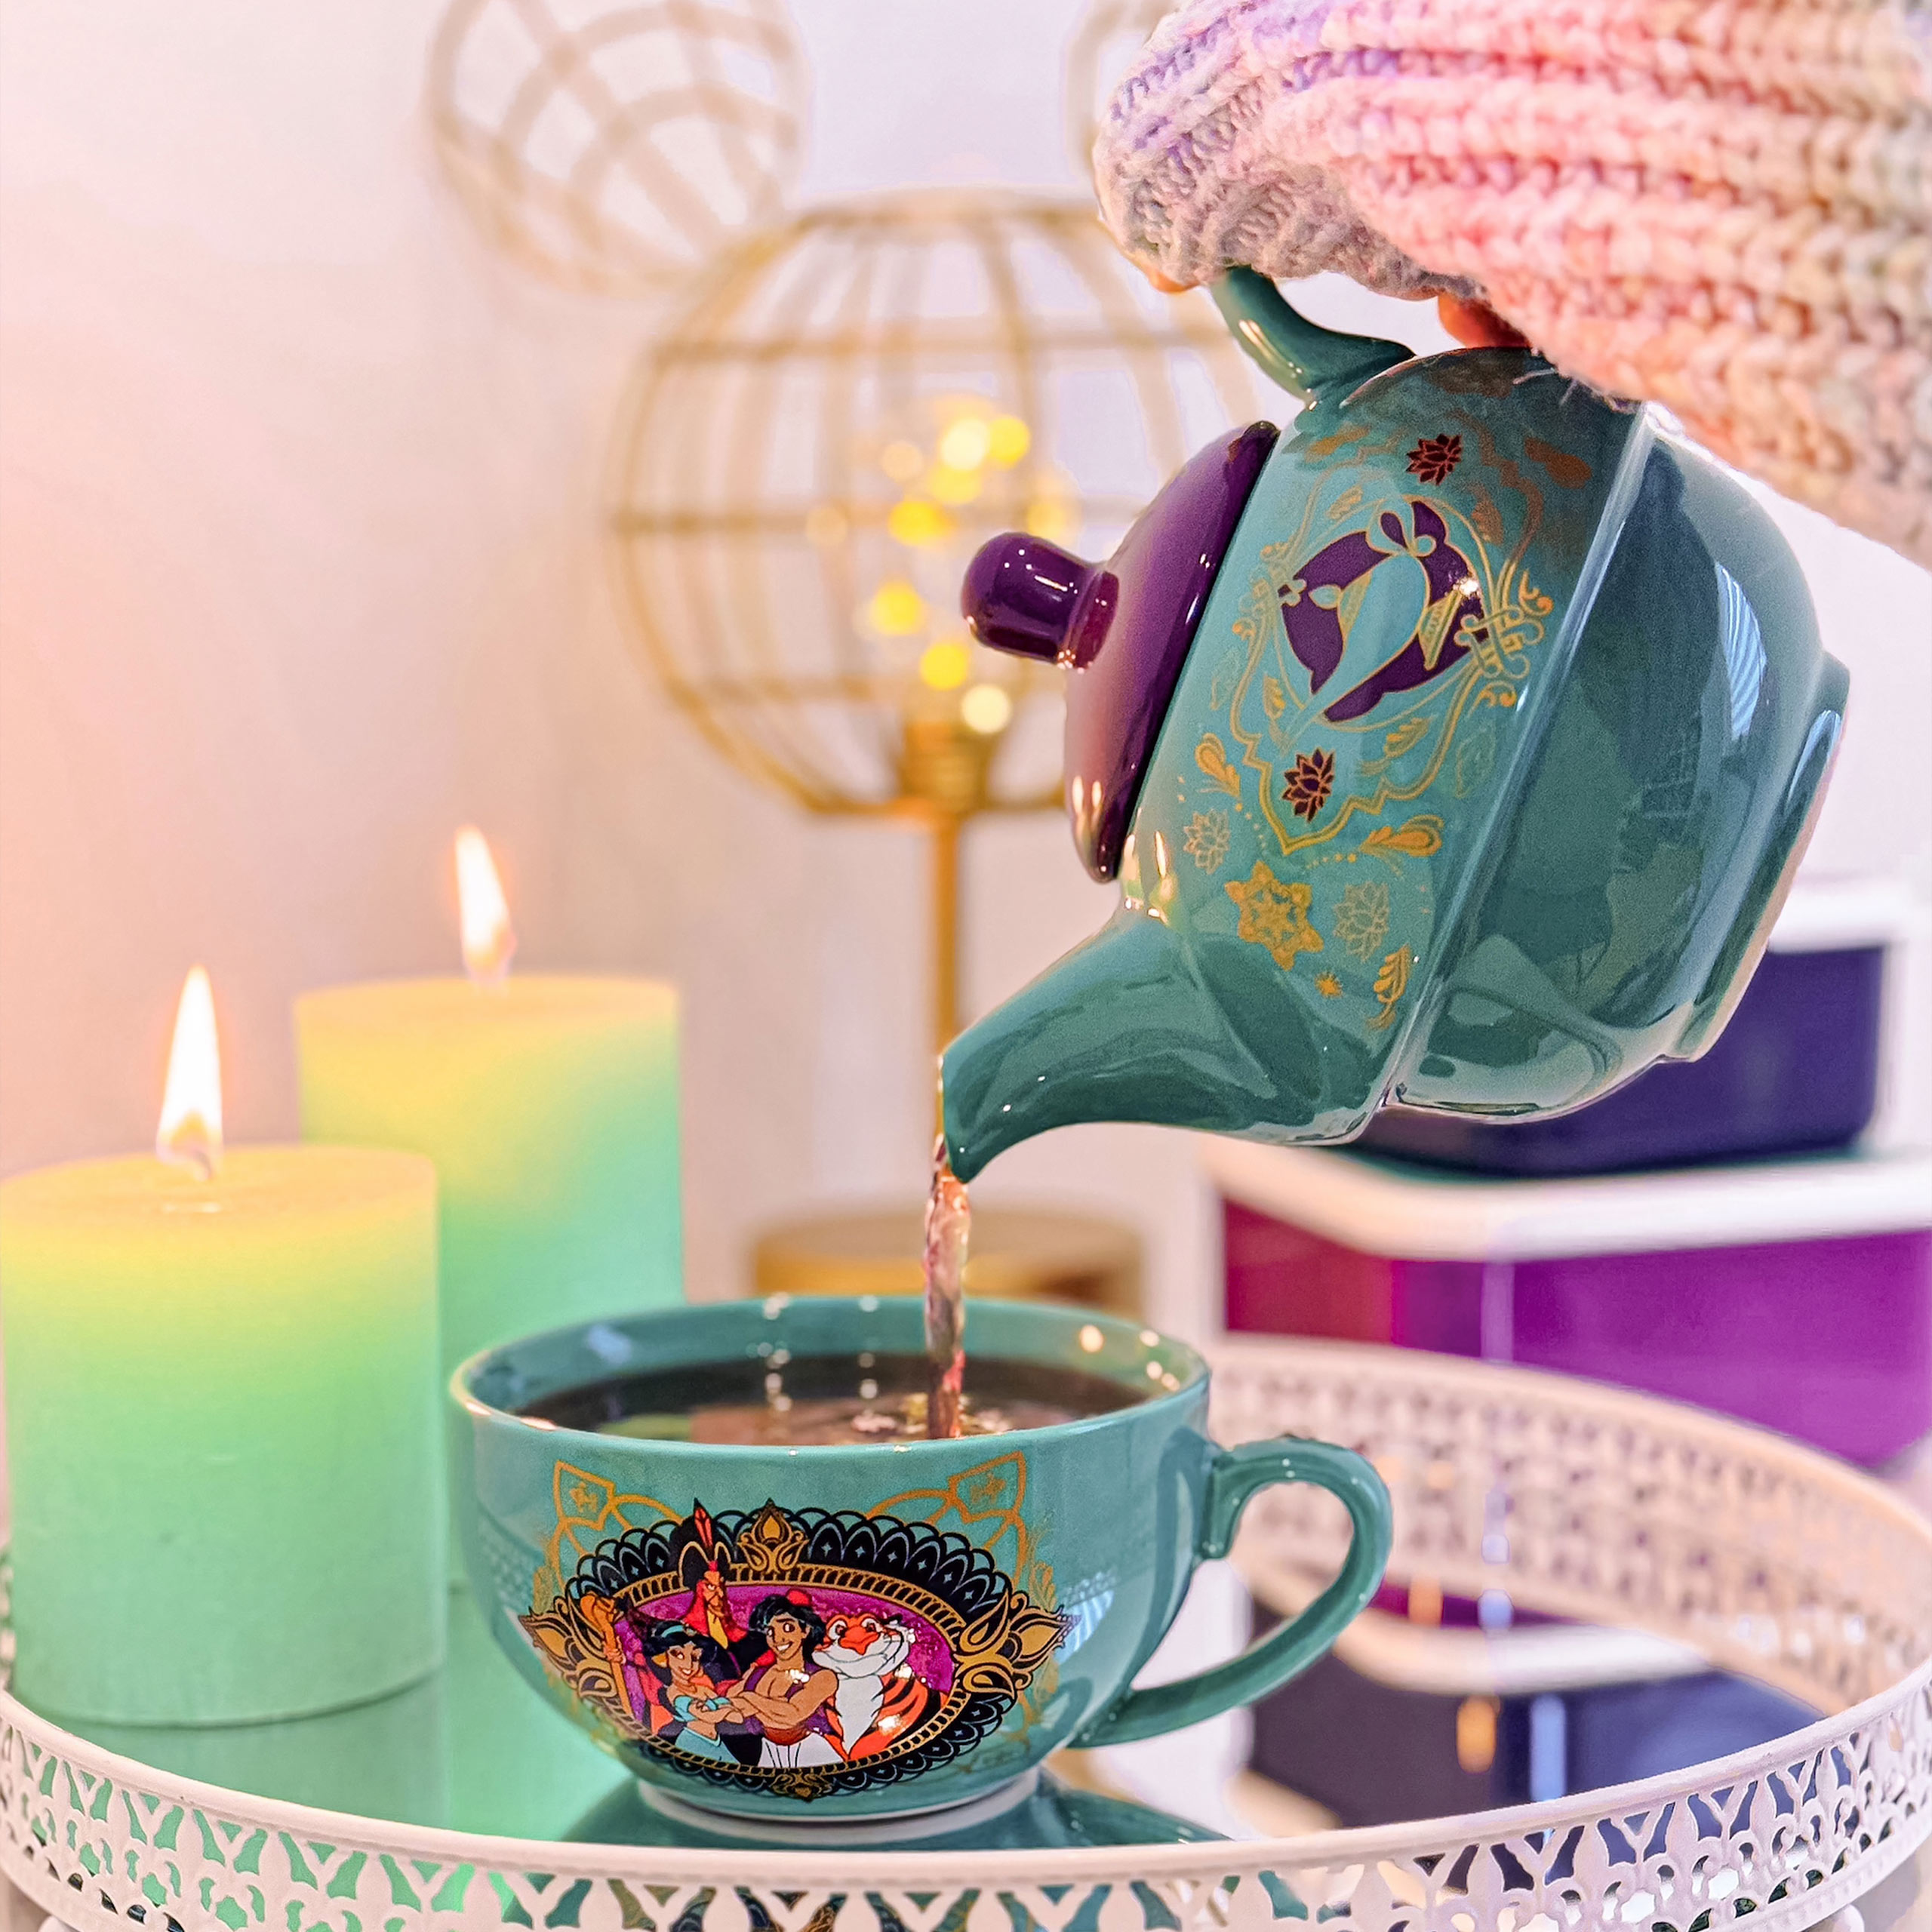 Aladdin - Always Wishing for Adventure Tea Pot with Cup